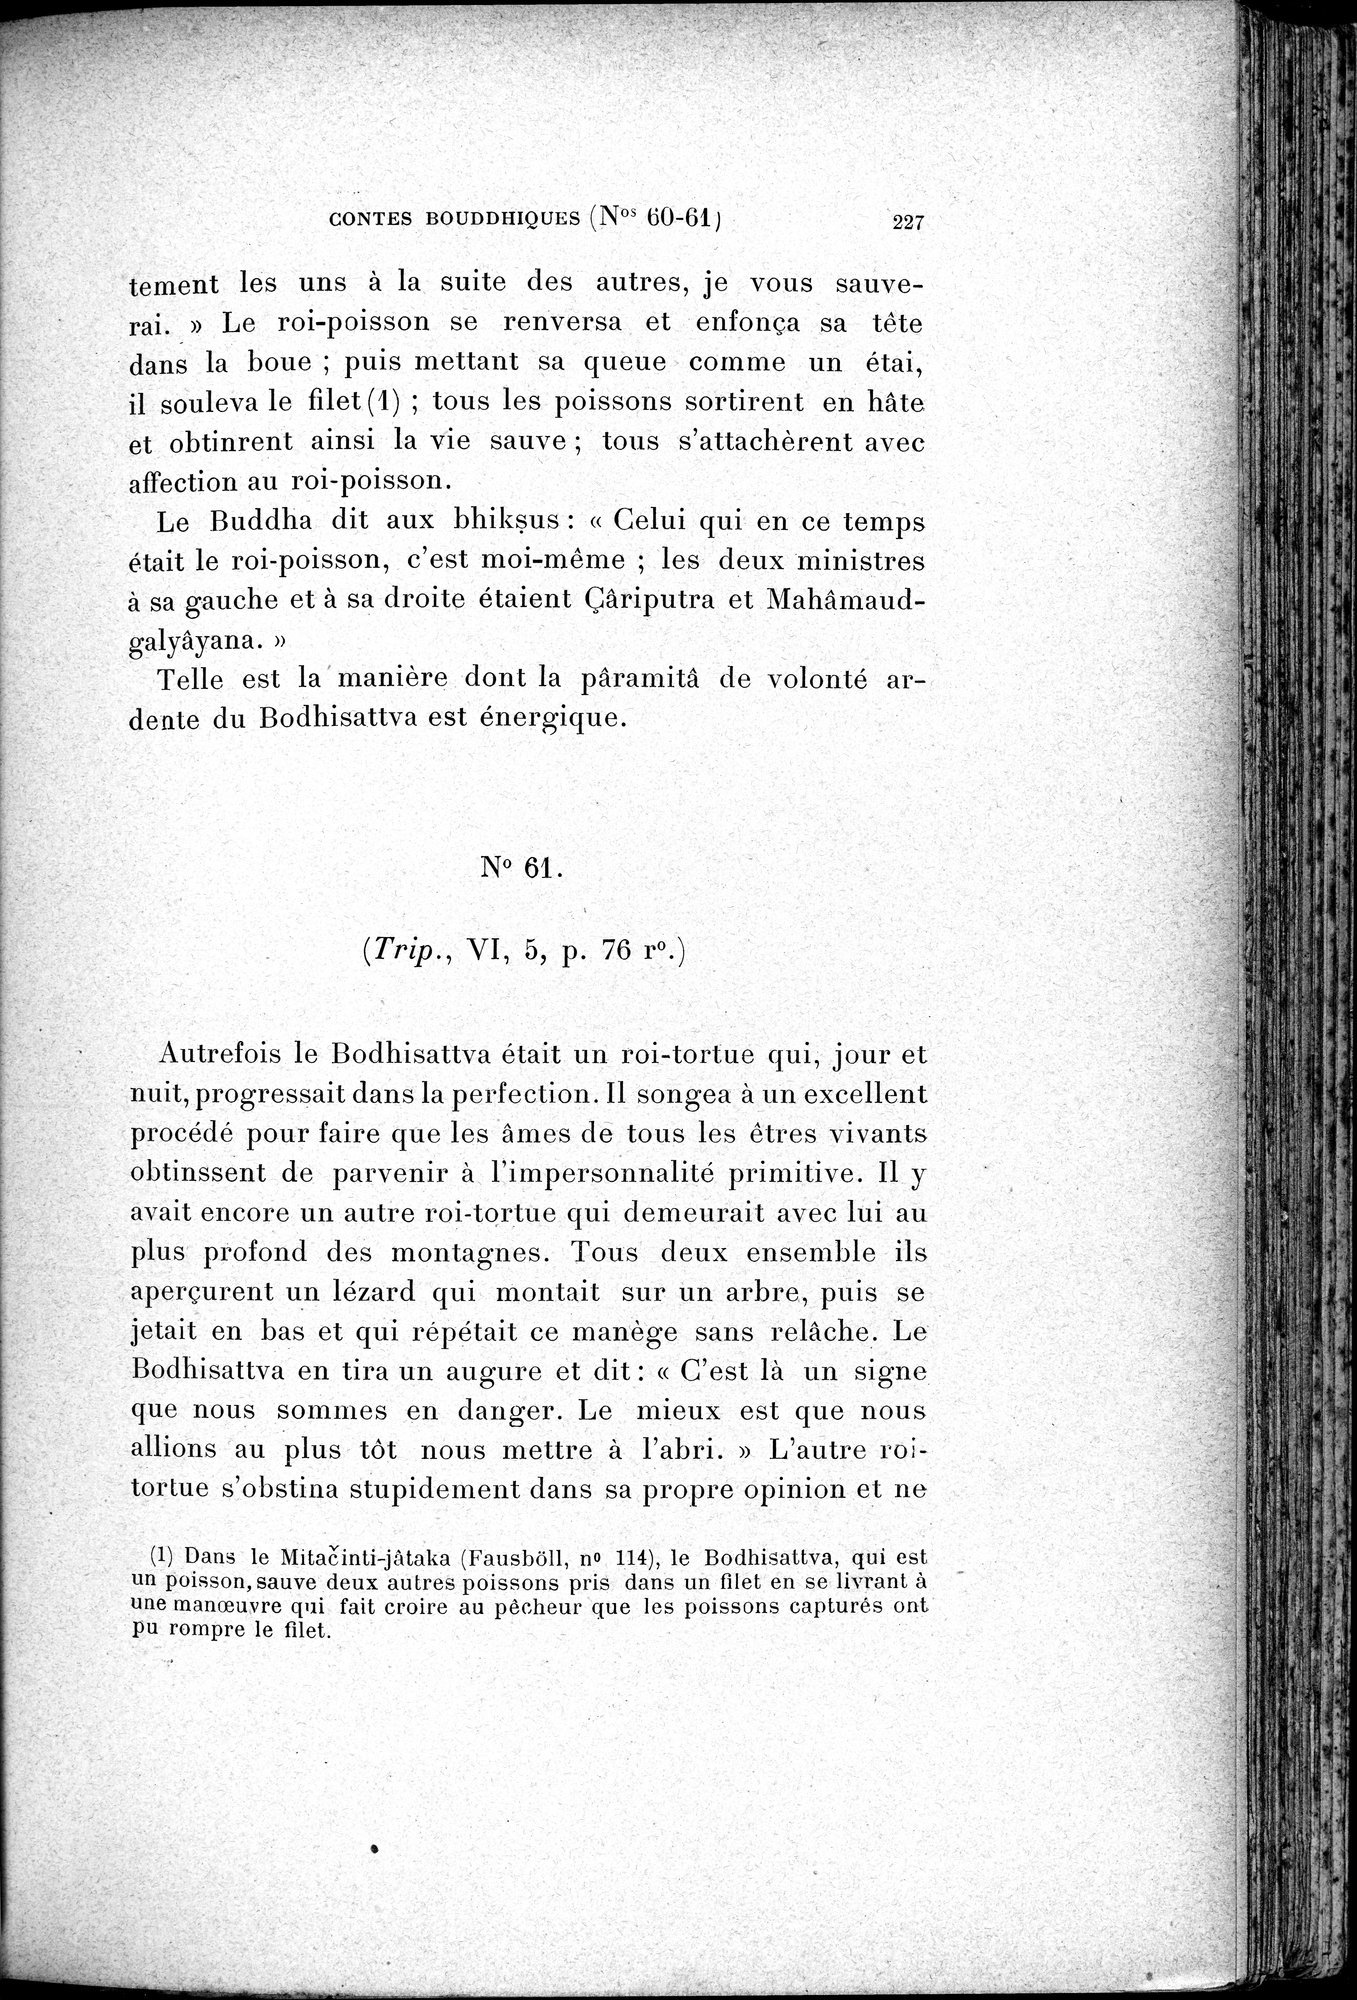 Cinq Cents Contes et Apologues : vol.1 / Page 261 (Grayscale High Resolution Image)